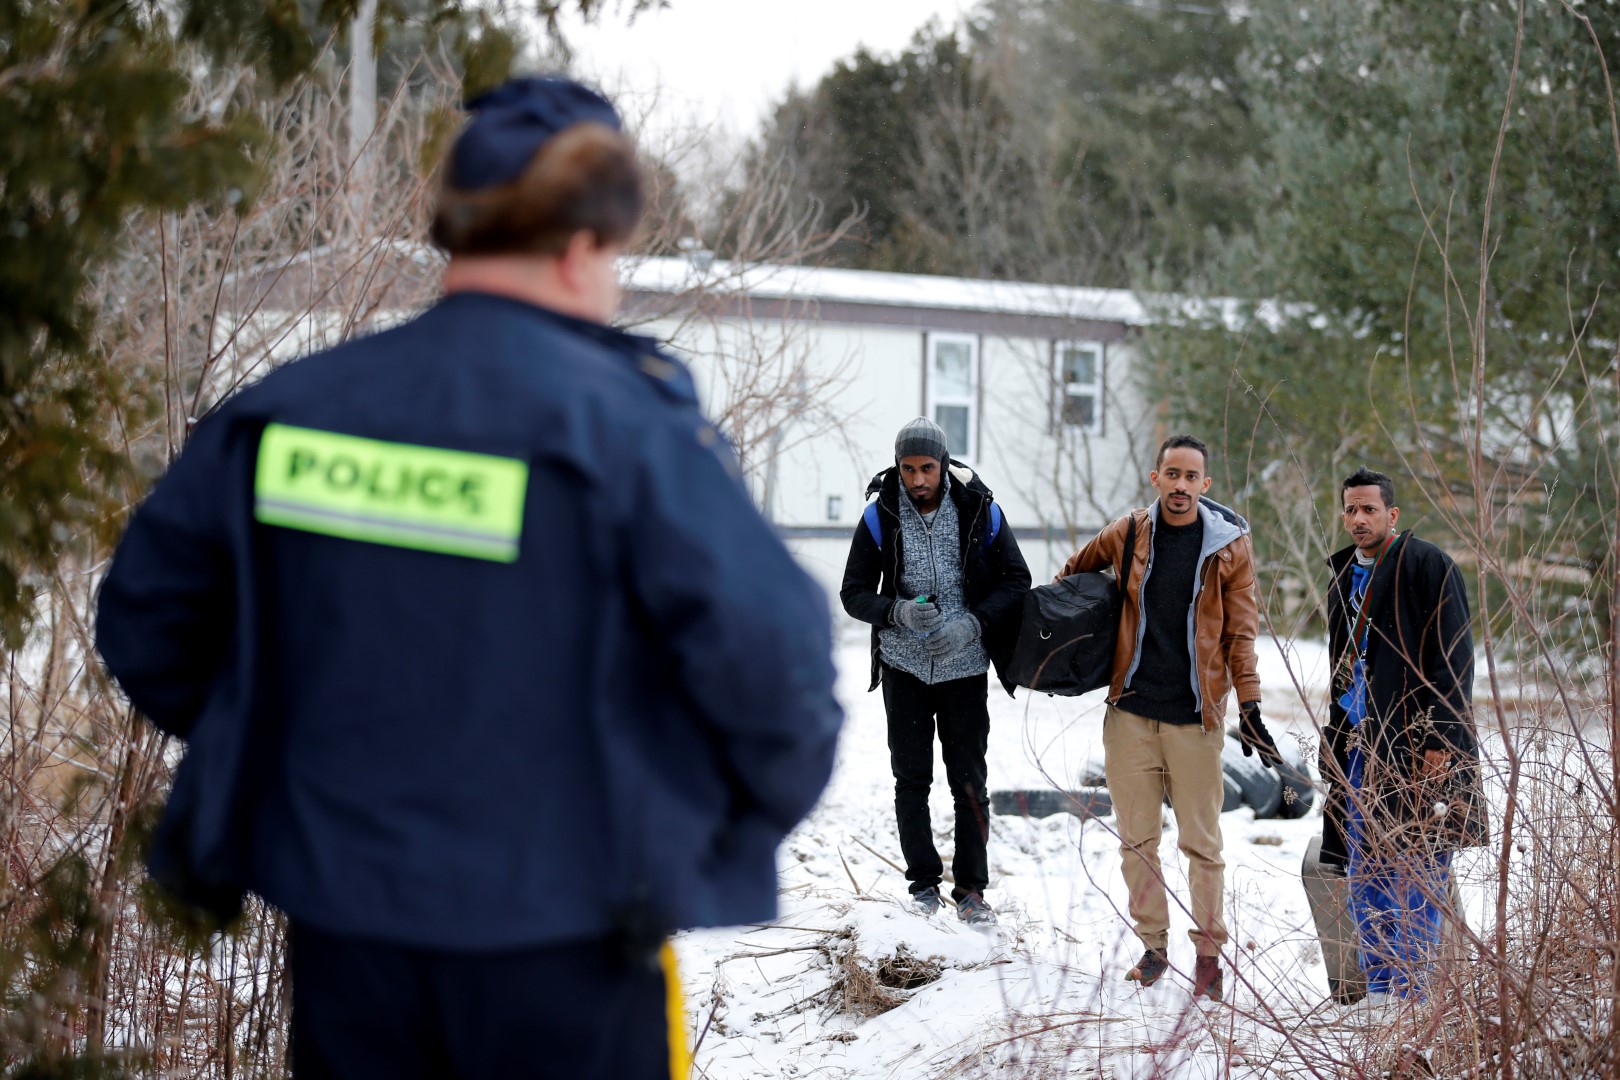 Three men who claimed to be from Sudan and were driven by taxi driver Curtis Seymour, are confronted by Royal Canadian Mounted Police (RCMP) as they prepare to cross illegally the U.S.-Canada border into Hemmingford, Quebec, Canada, March 4, 2017. The men were taken into custody after walking across the U.S.-Canada border. REUTERS/Christinne Muschi           SEARCH "MUSCHI CABBIE" FOR THIS STORY. SEARCH "WIDER IMAGE" FOR ALL STORIES. - RC19055660A0